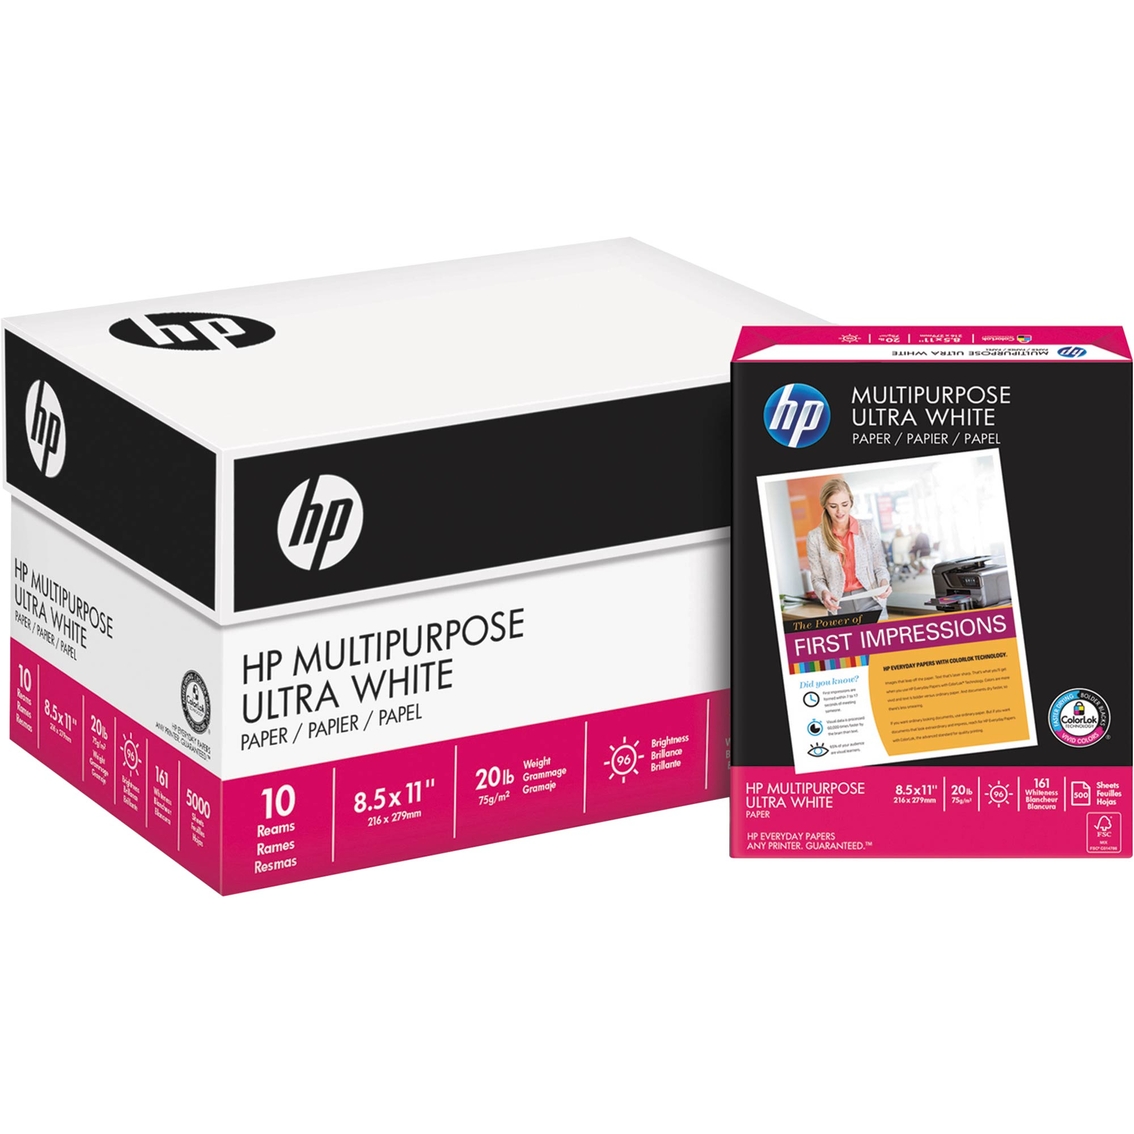 HP Multipurpose 8.5 x 11 in. 20 lbs. 96 Brightness Paper 500 Sheets - Image 3 of 3